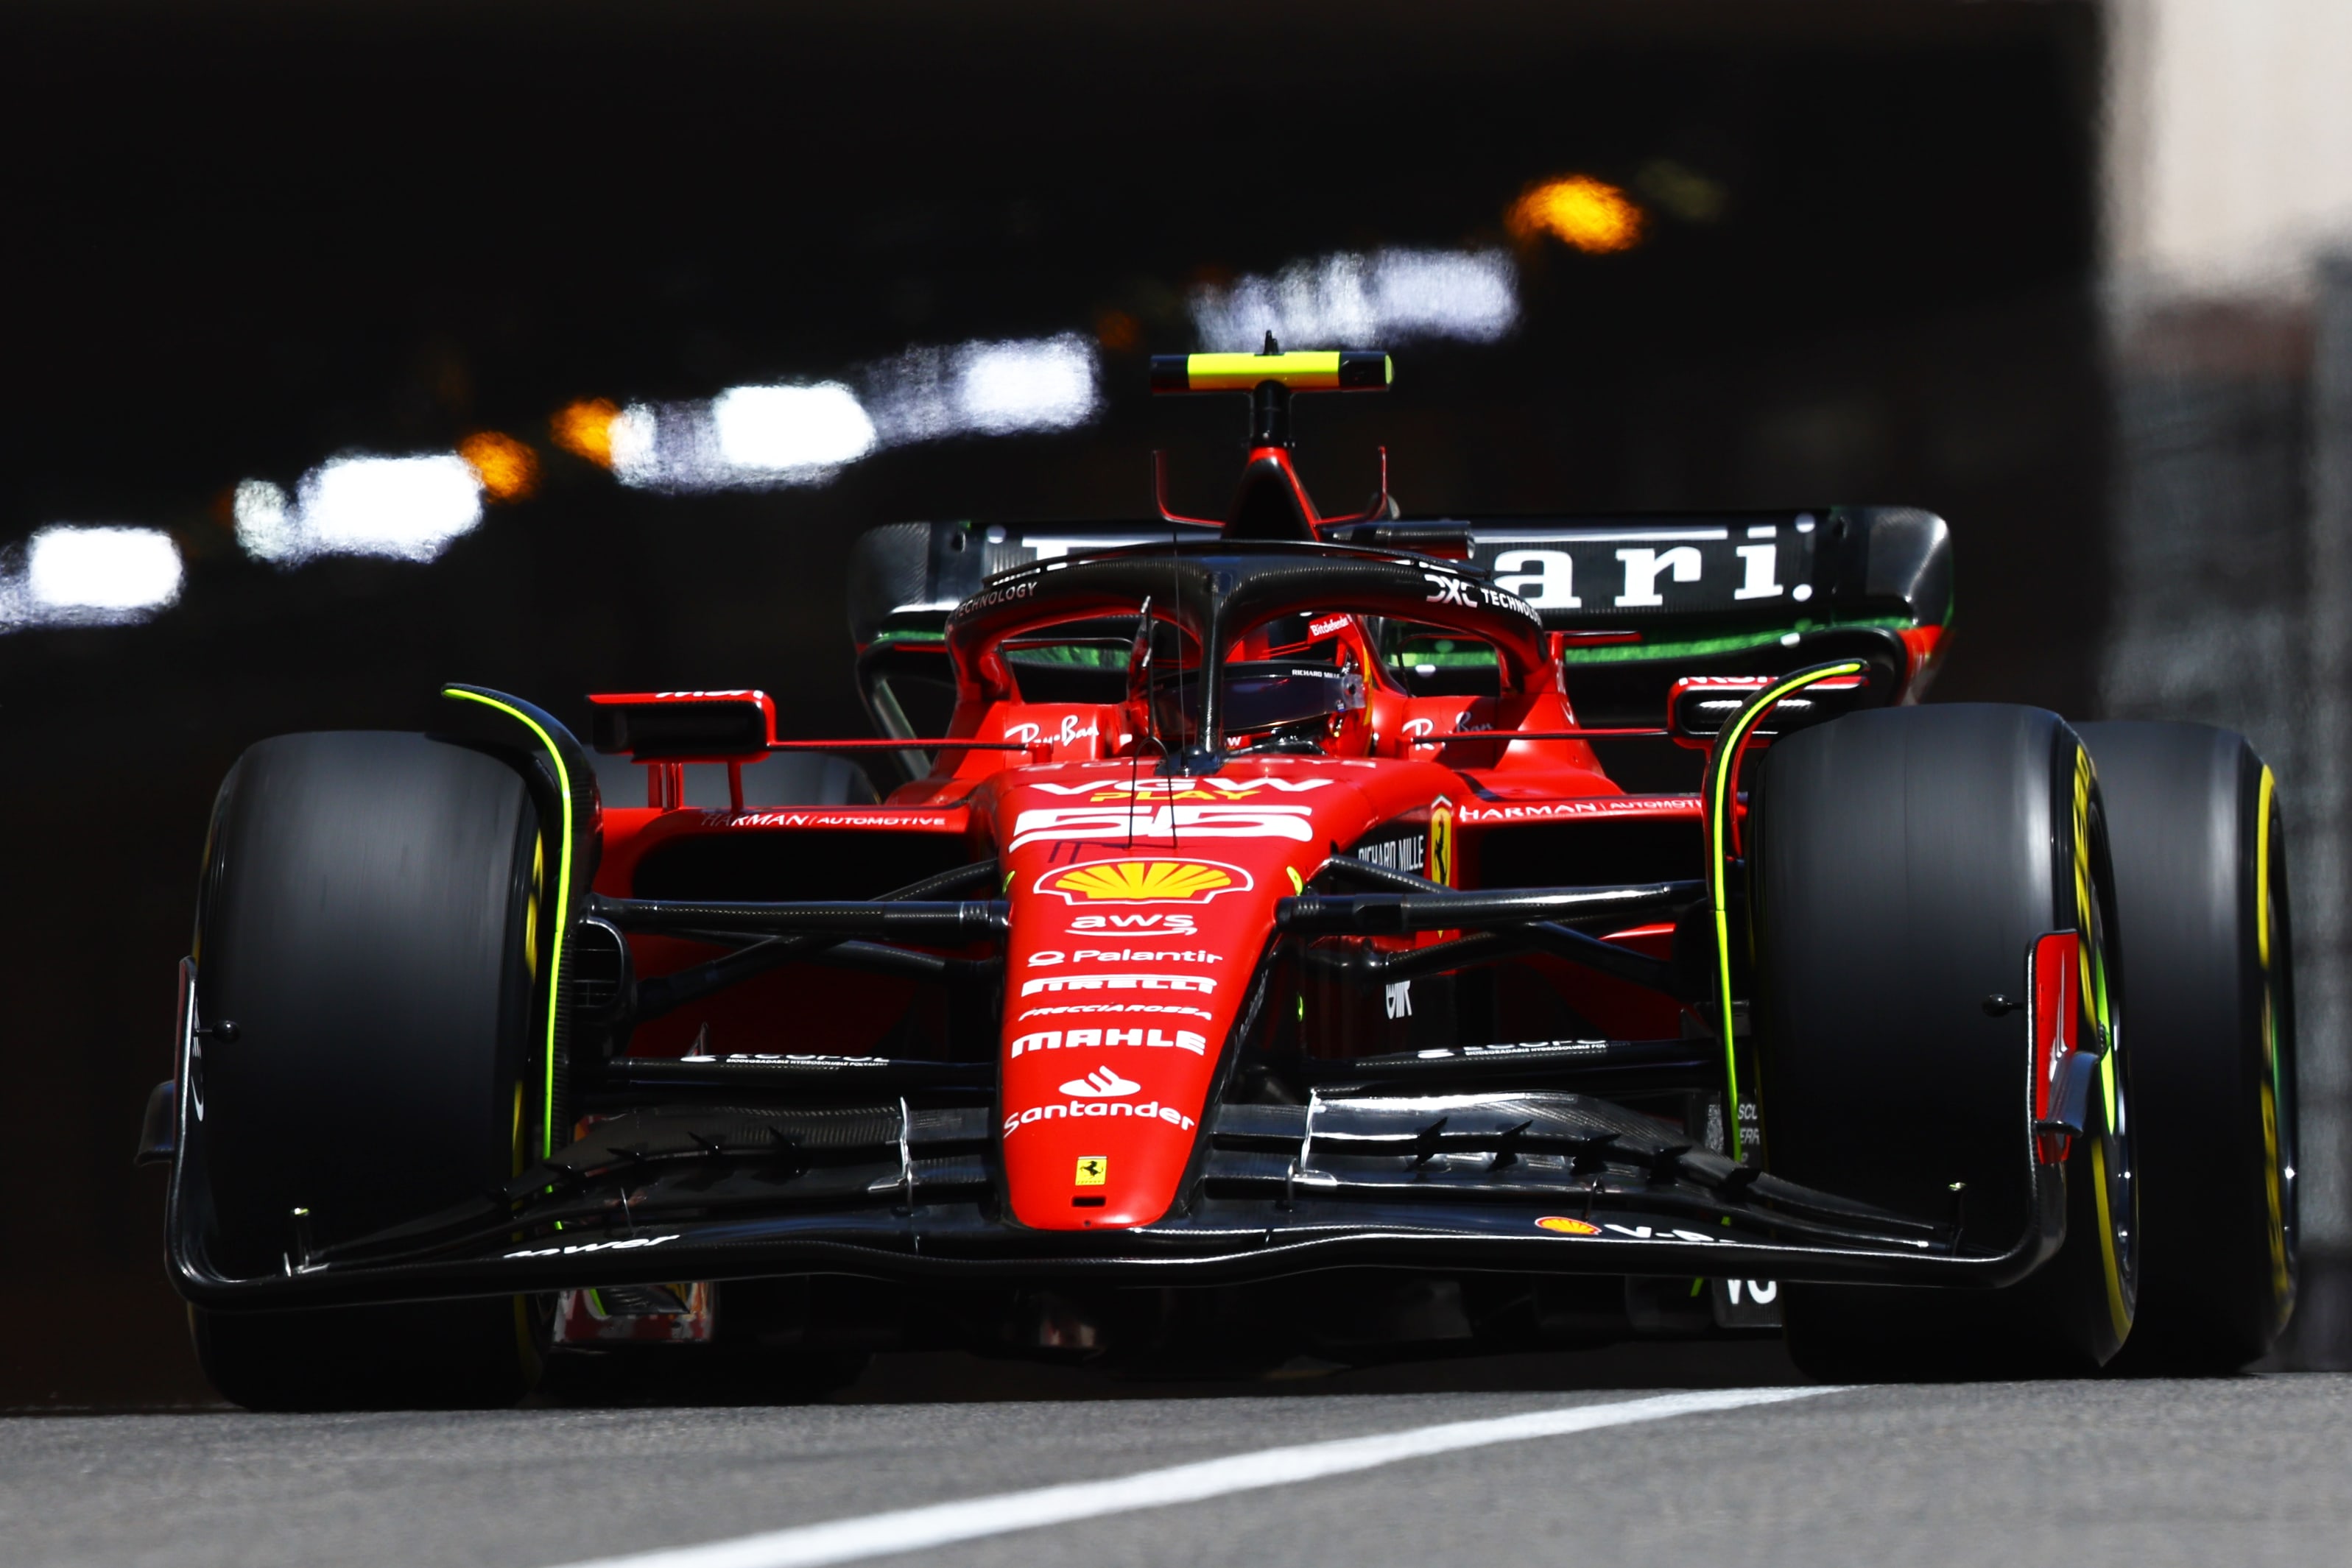 2023 Monaco Grand Prix FP1 report and highlights FP1 Sainz sets the pace ahead of Alonso and Hamilton in opening practice session in Monaco Formula 1®